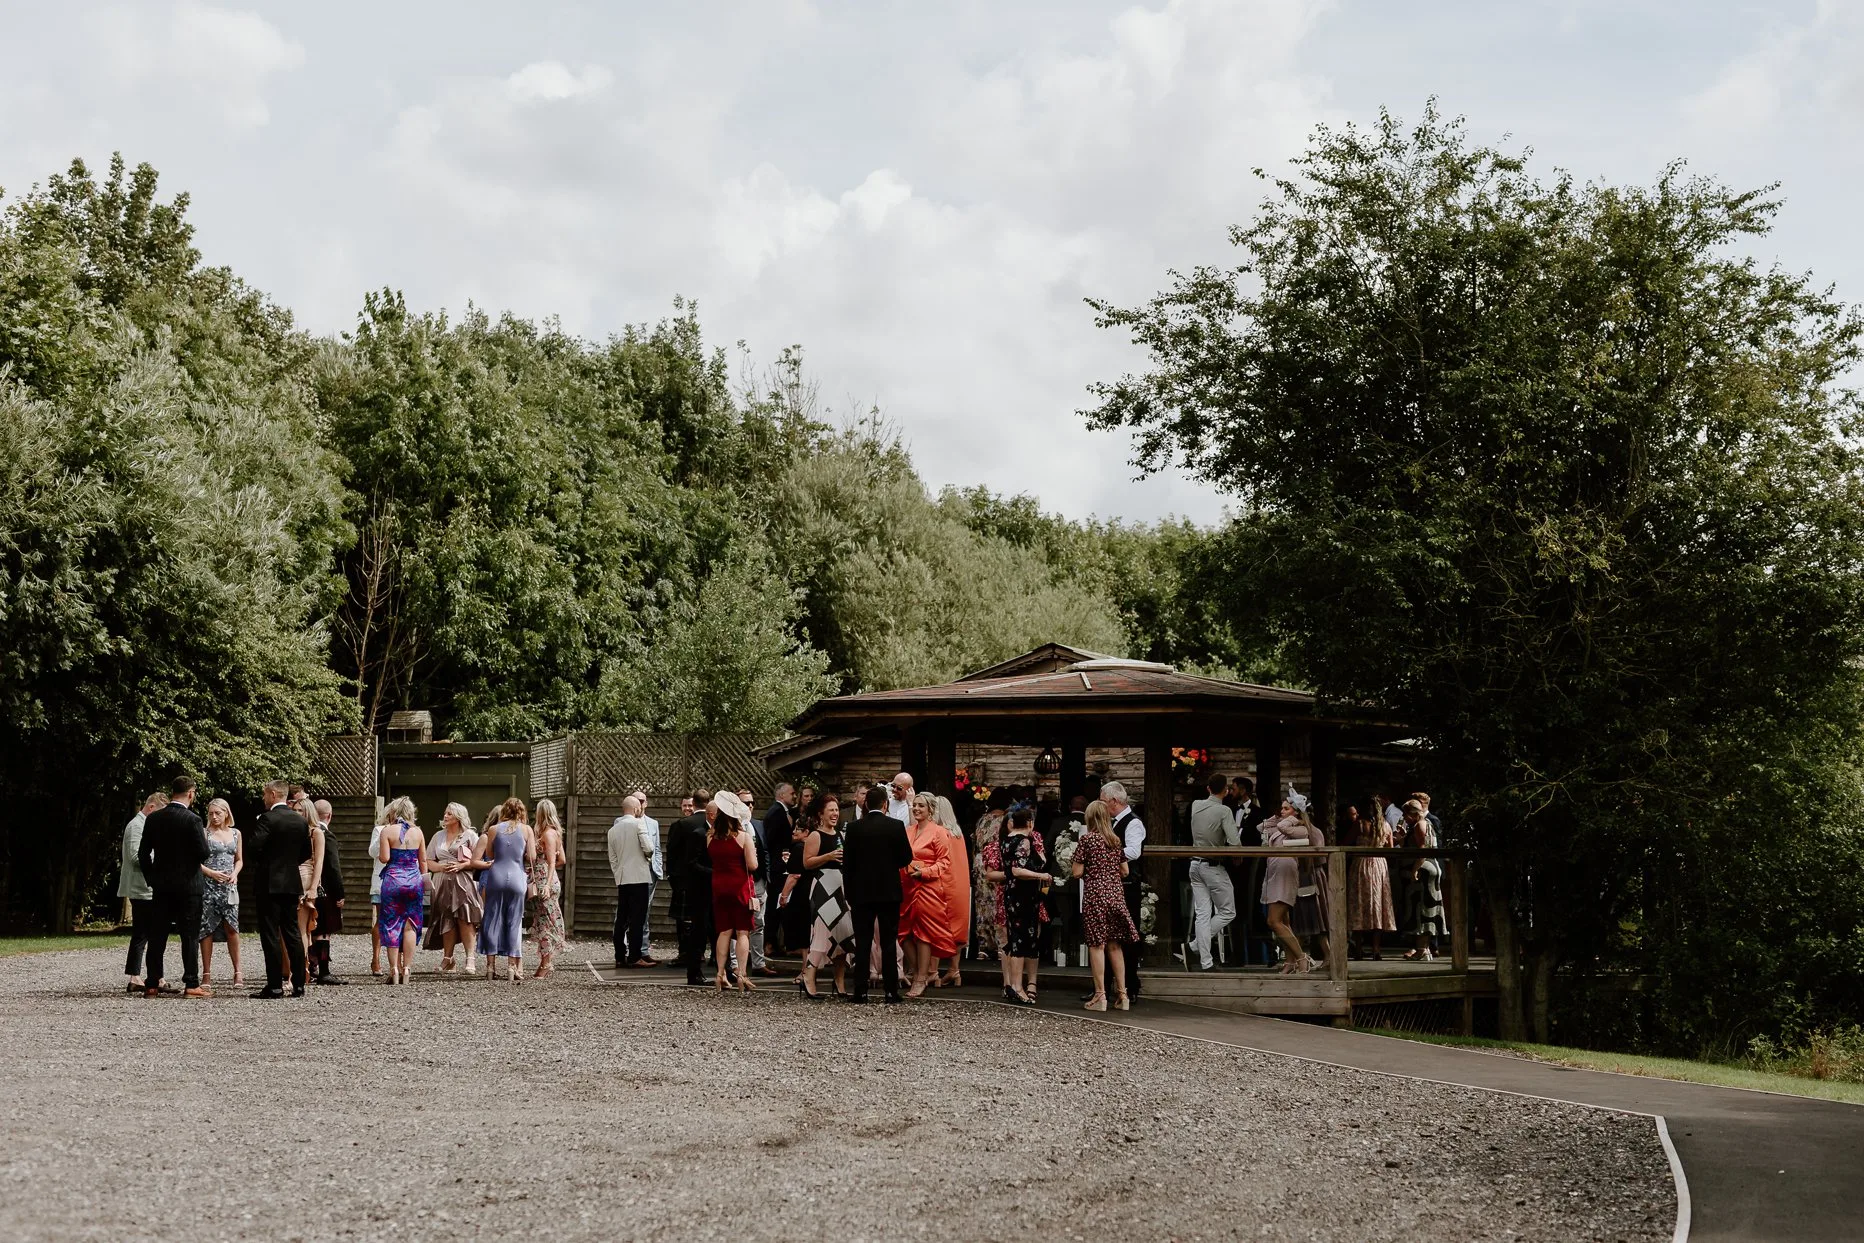 Wedding guests waiting outside the Lakeside Lodge before a wedding ceremony at Oaklands. The sun is shining and the trees surrounded the area are green.